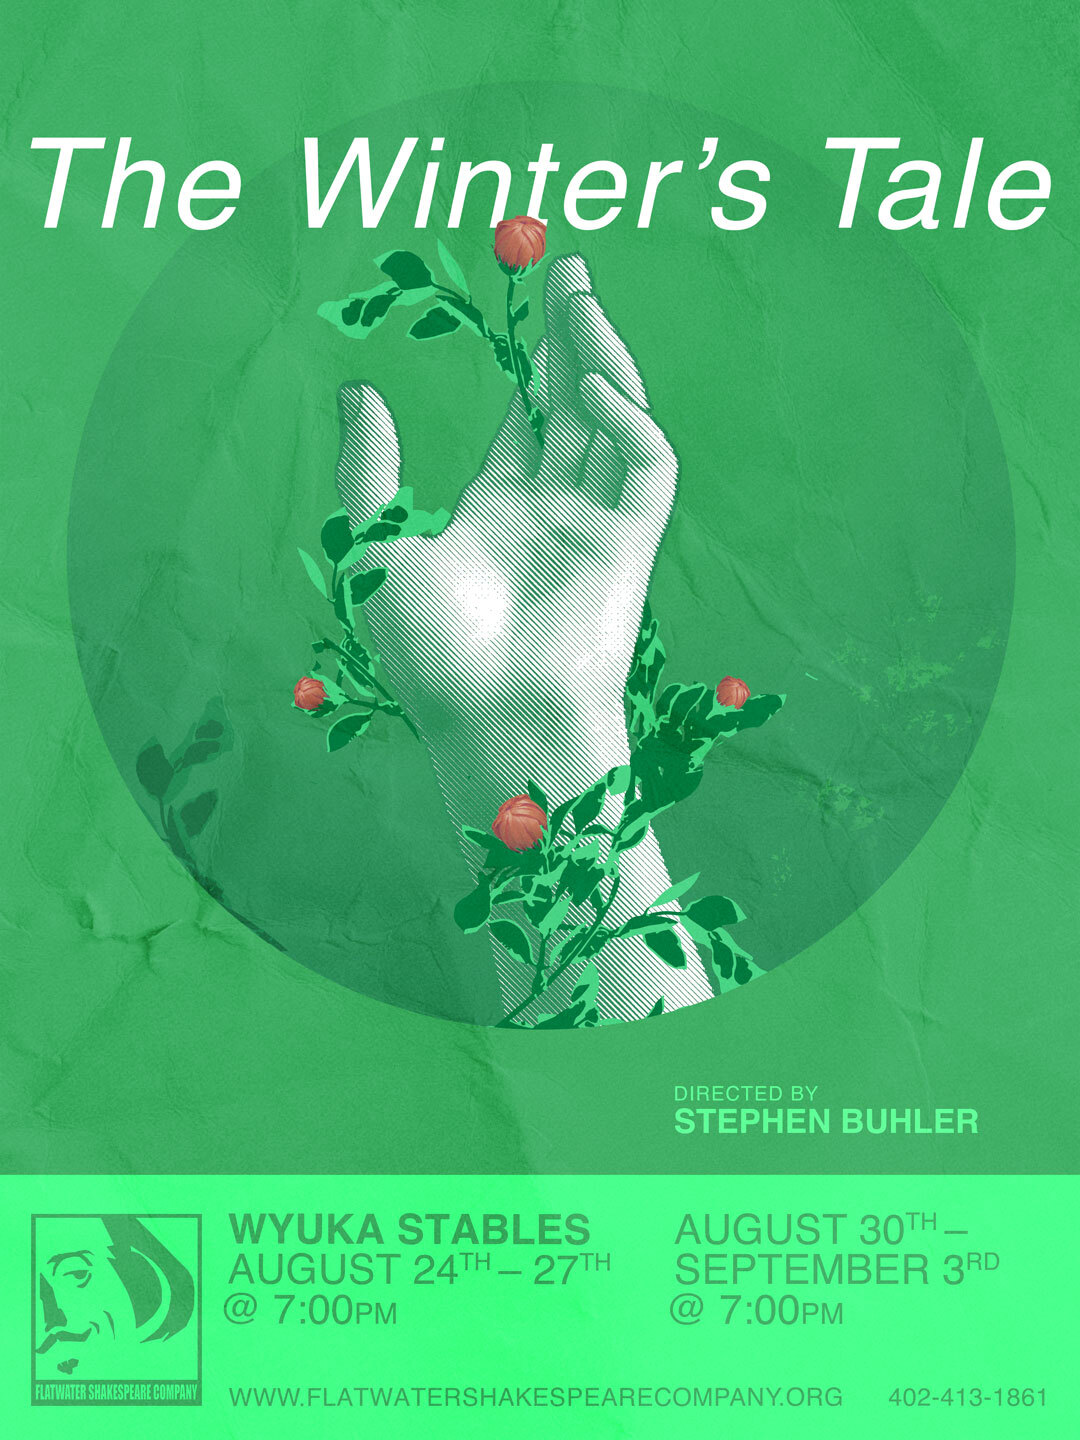 9/2 ADU - ADULT: Sat. September 2, 2023 | 7:00 p.m. - 10:00 p.m. CST | Wyuka Stables (The Winter's Tale)